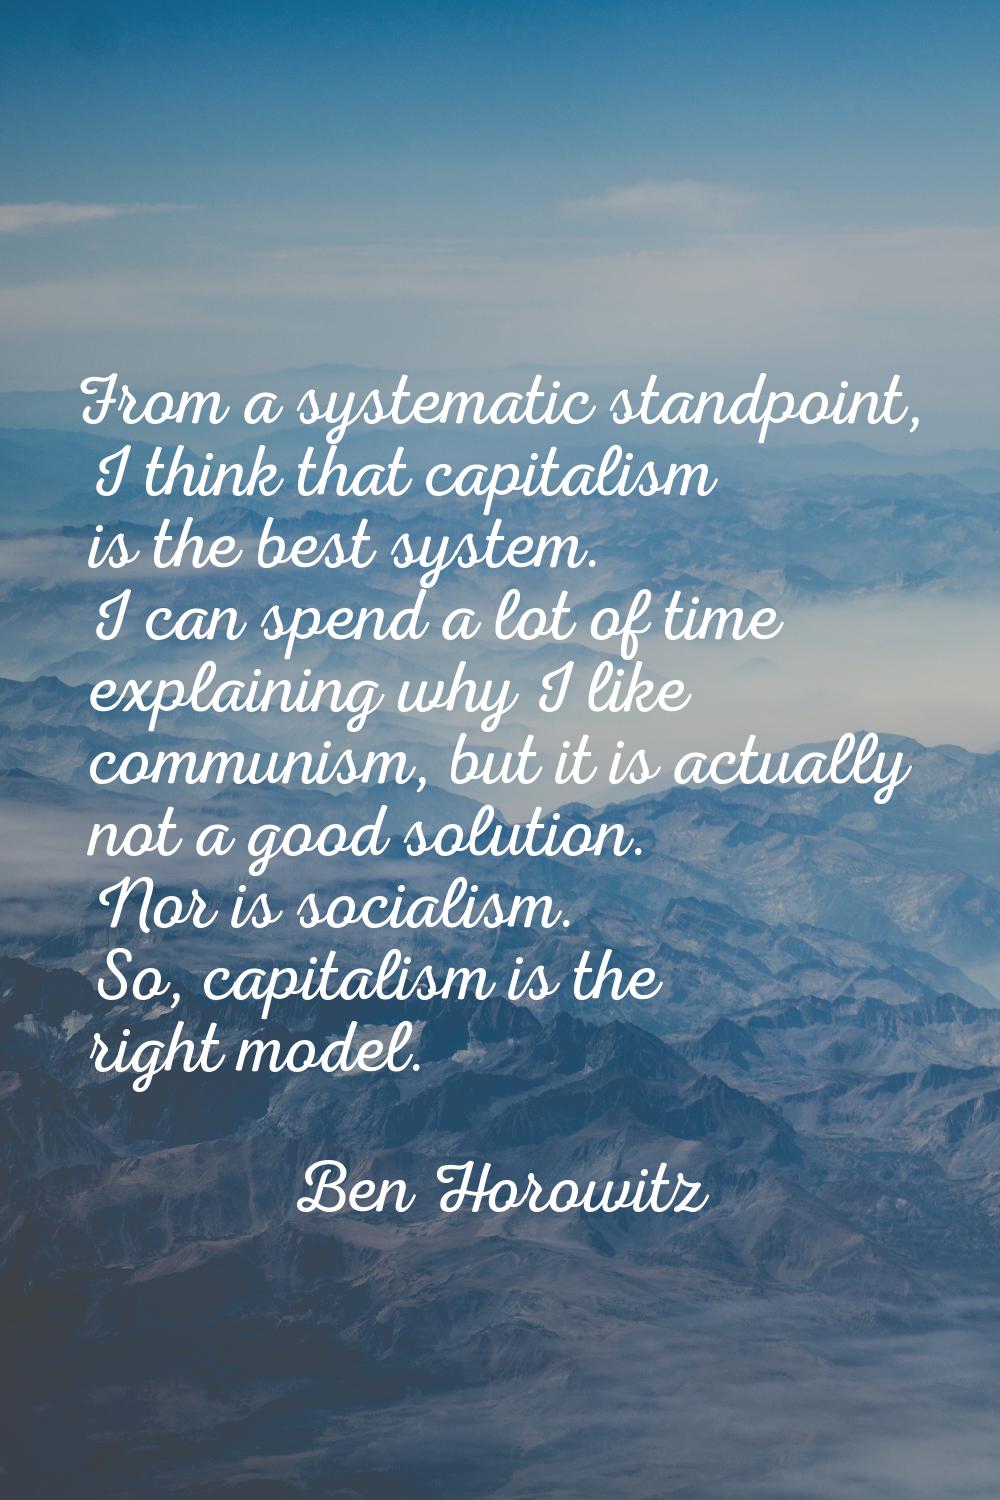 From a systematic standpoint, I think that capitalism is the best system. I can spend a lot of time